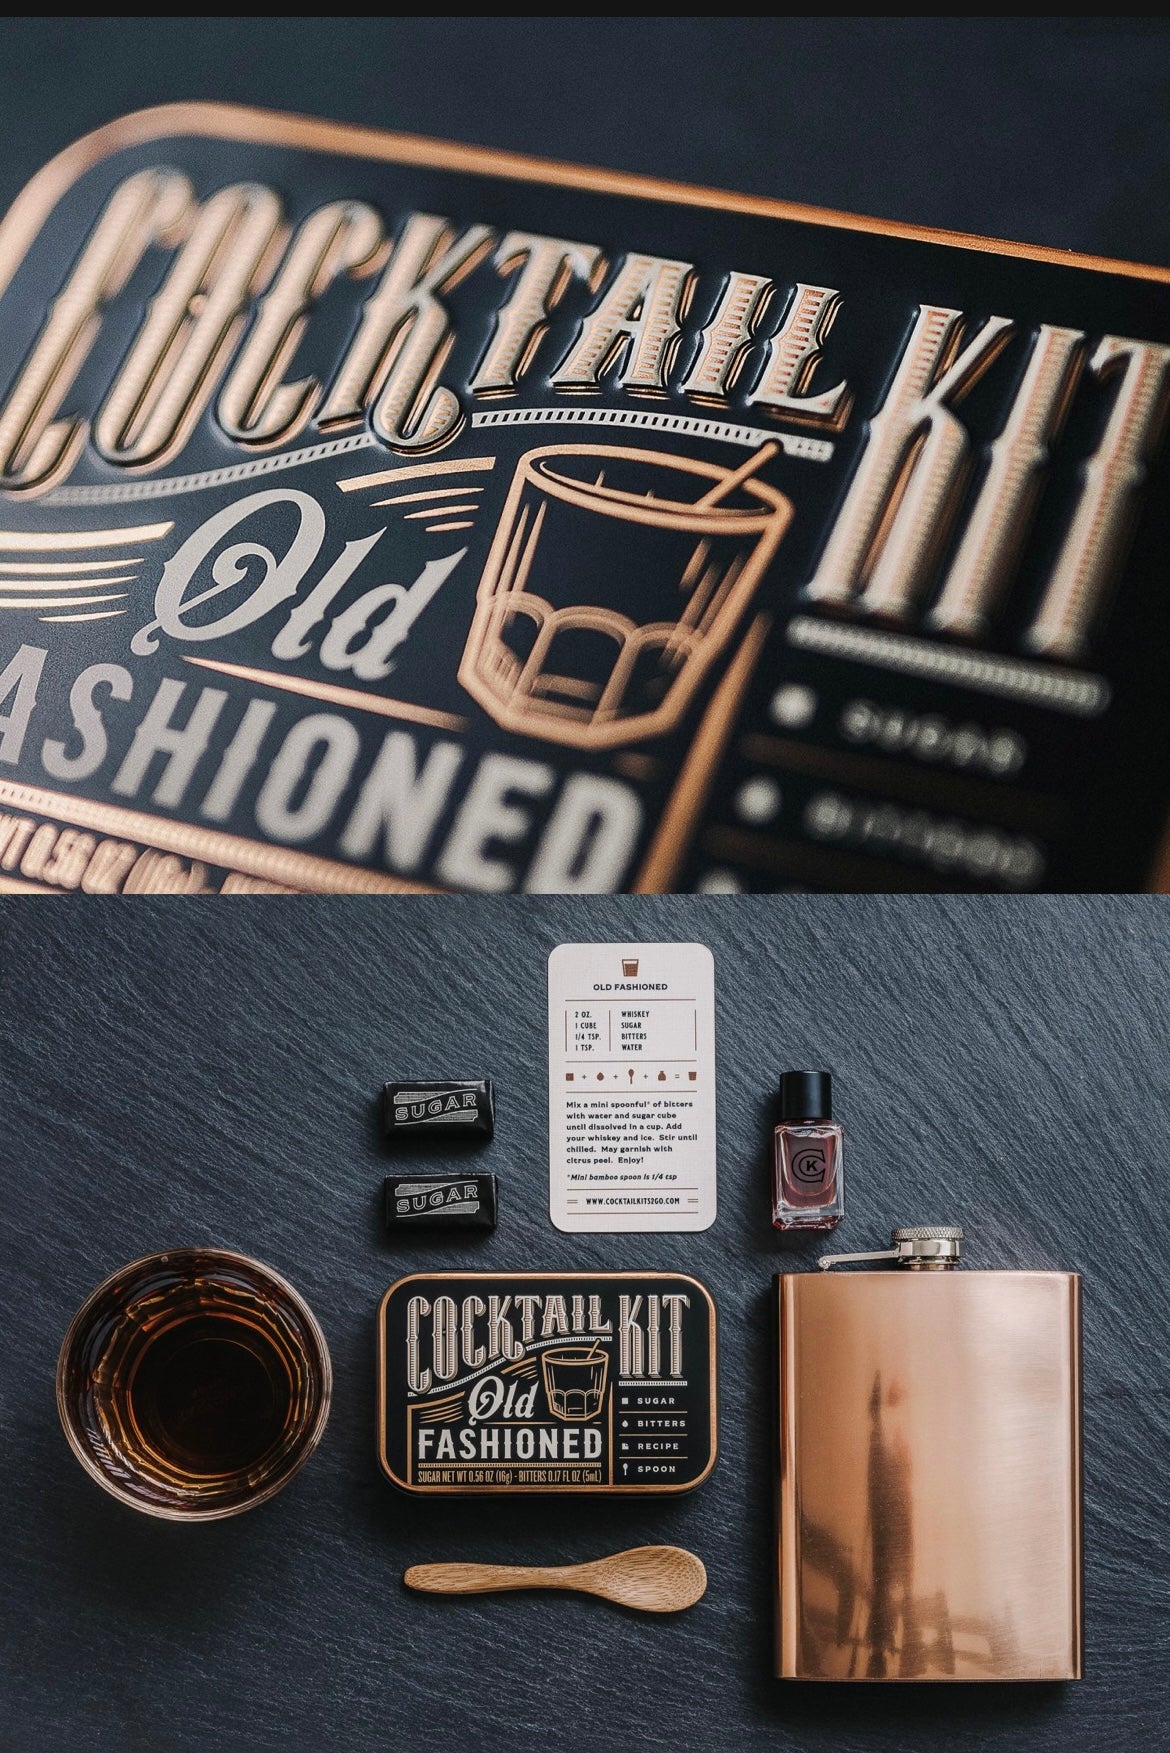 Cocktail Kit Old Fashioned